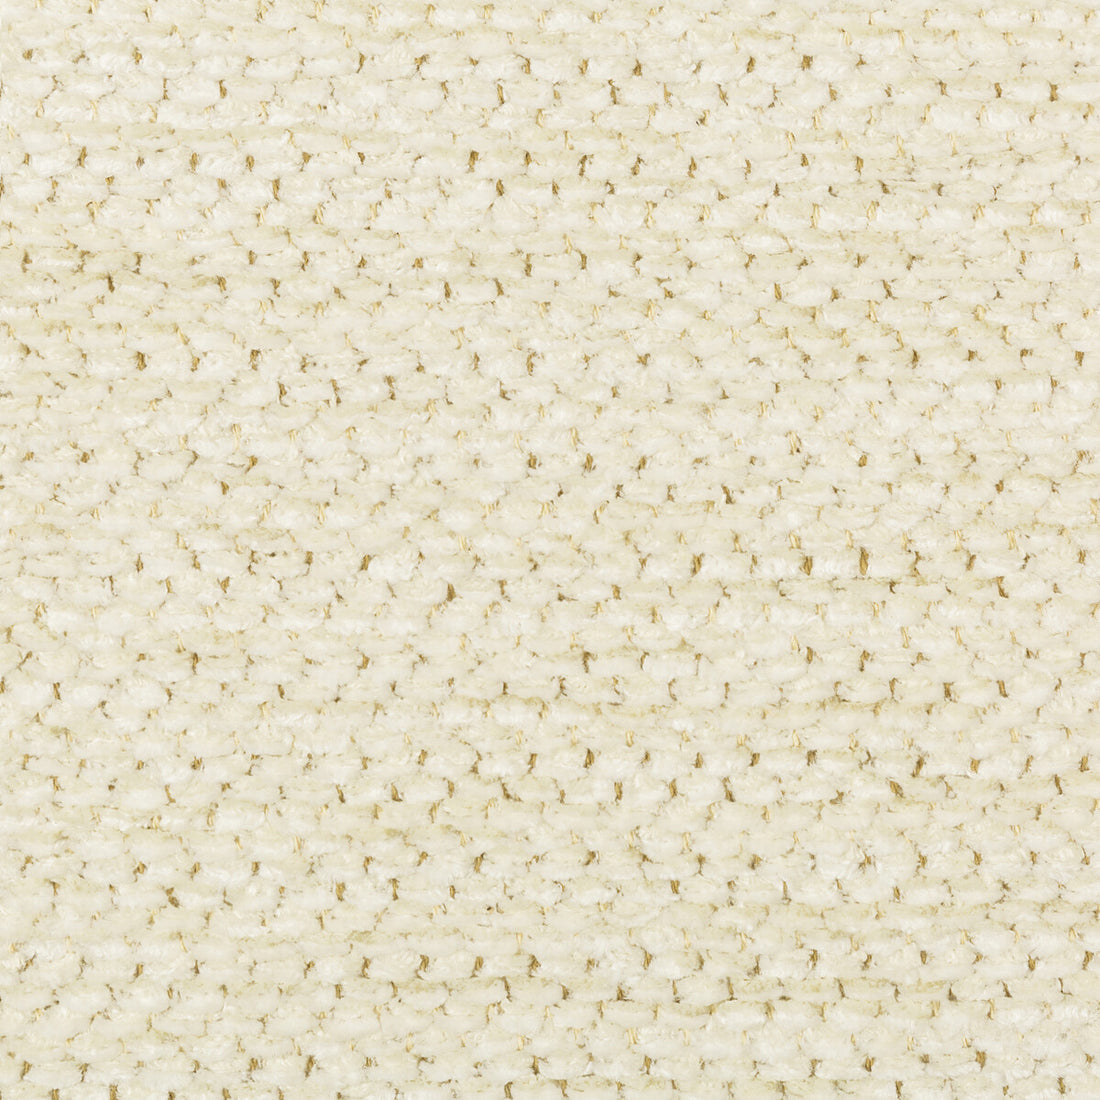 Chamoux Texture fabric in cream color - pattern 8019145.1.0 - by Brunschwig &amp; Fils in the Chambery Textures II collection